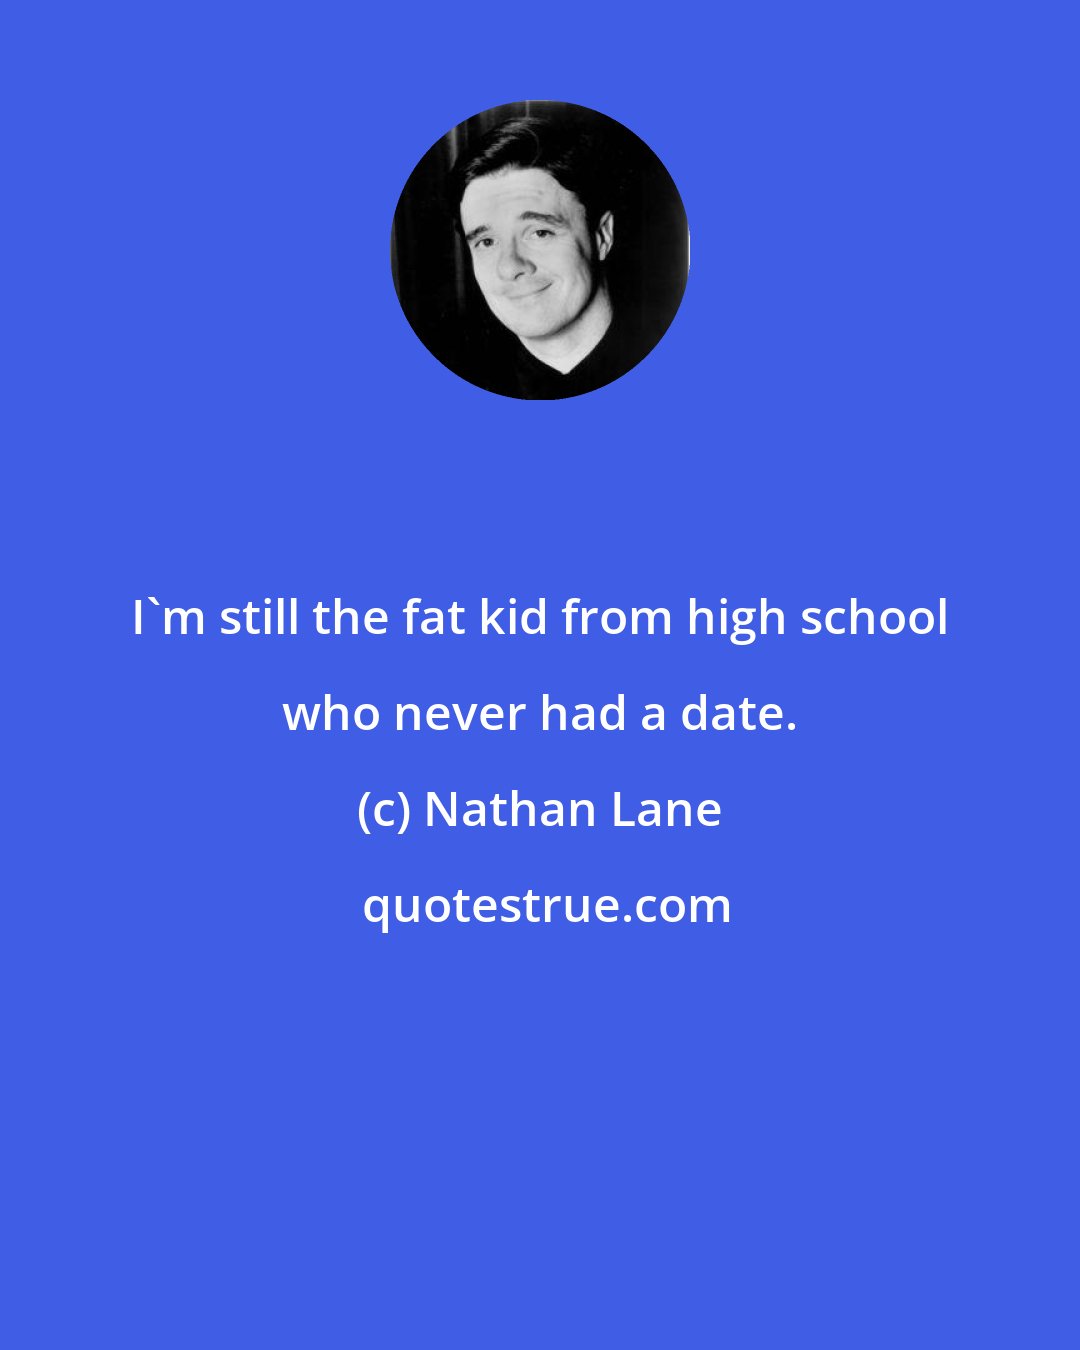 Nathan Lane: I'm still the fat kid from high school who never had a date.